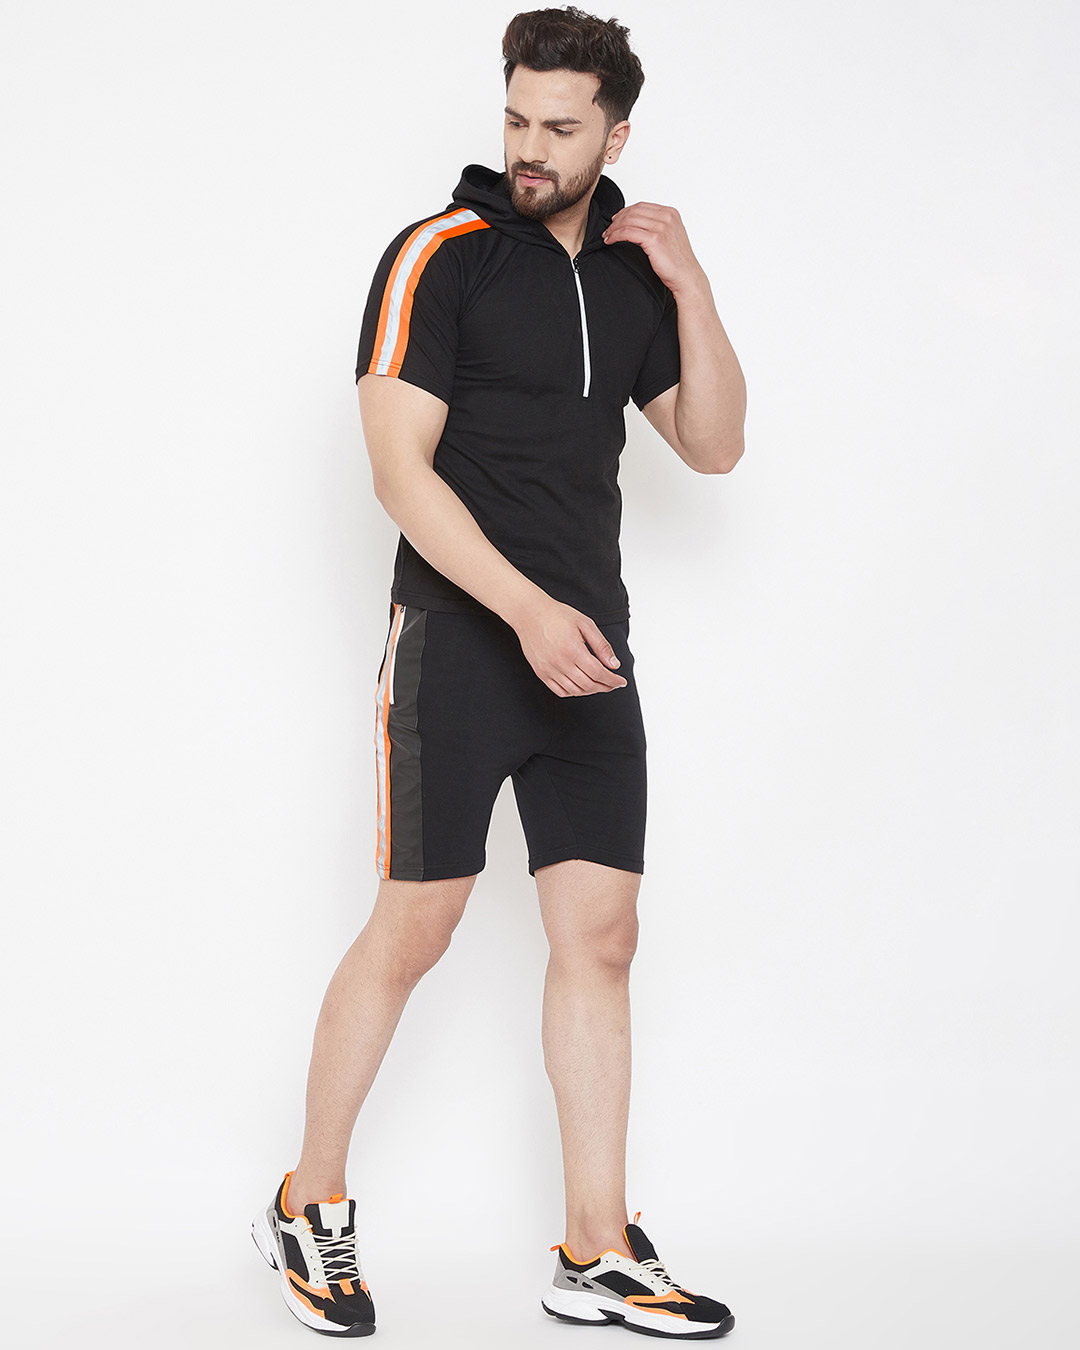 Shop Black Neon Orange Reflective Hooded T-Shirt And Shorts Combo Suit-Back